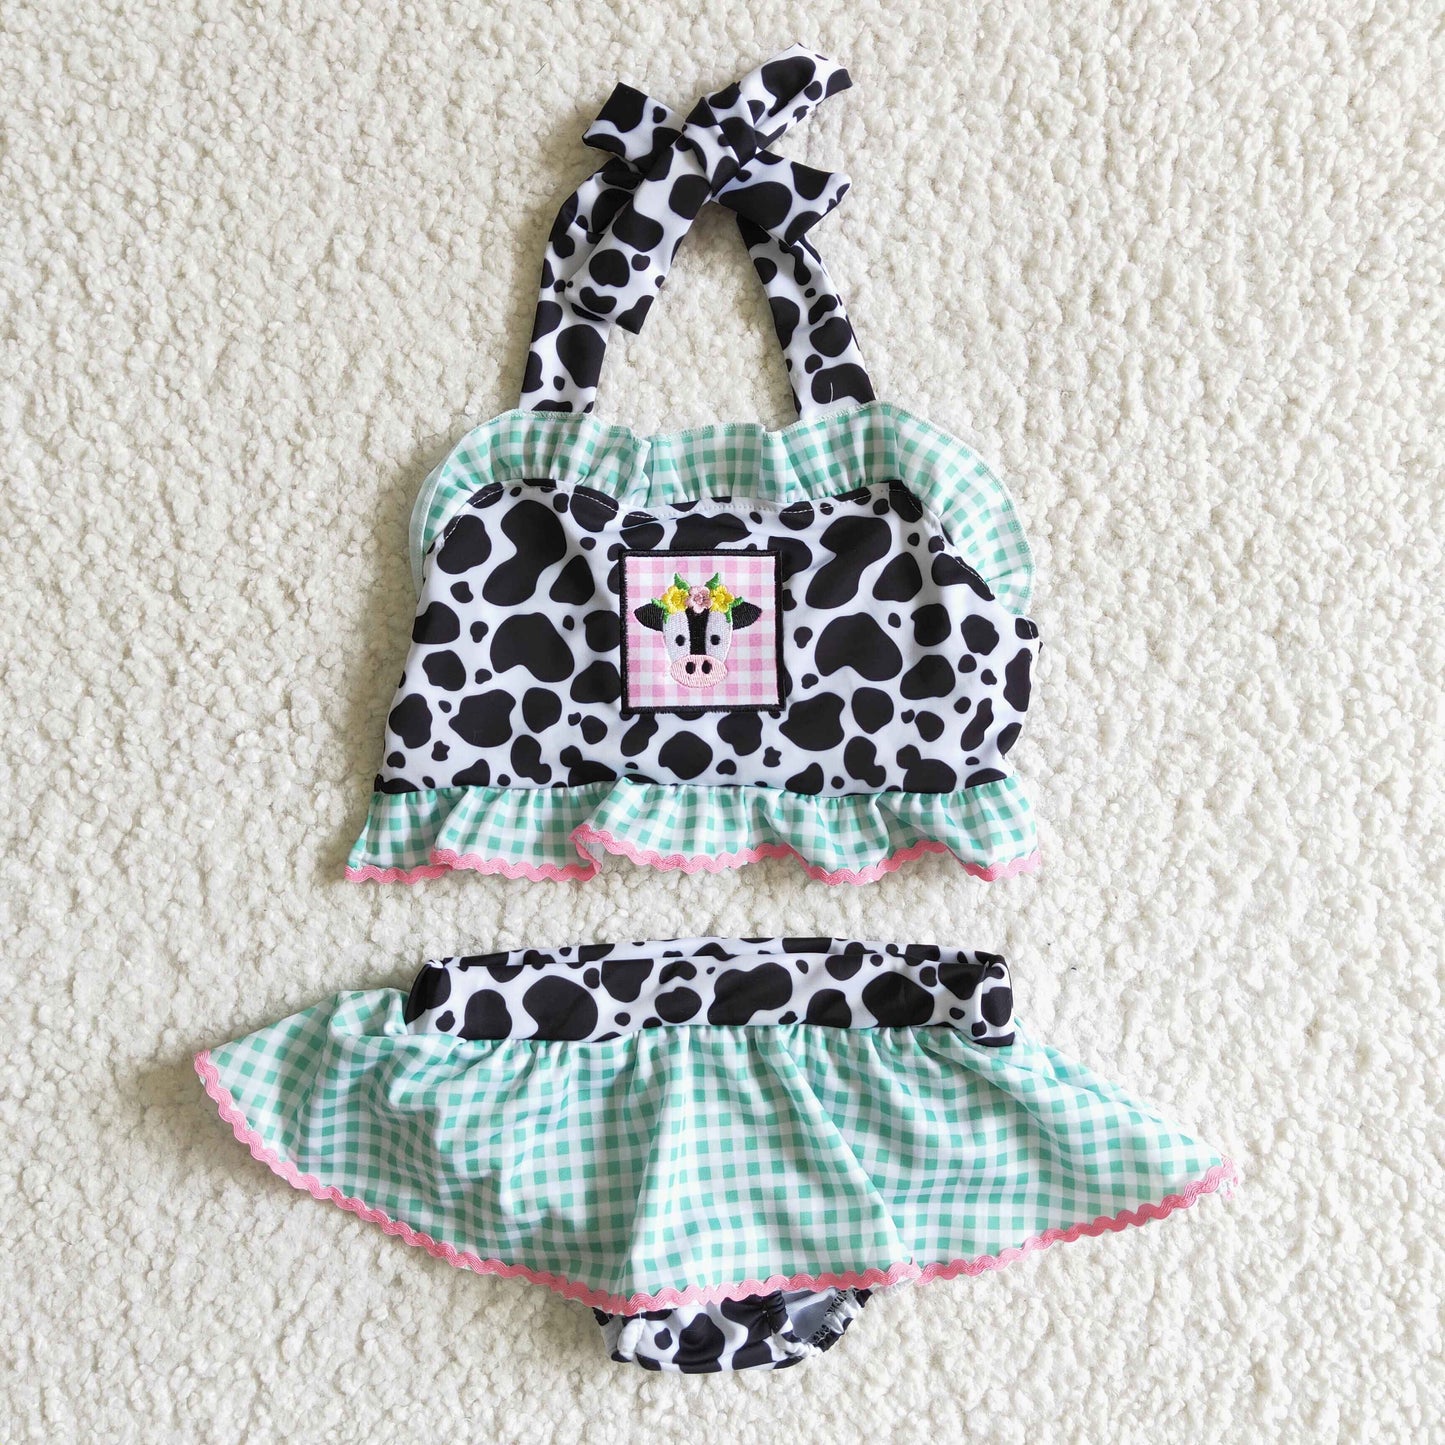 Girls embroidery design cow 2pcs bathing suit